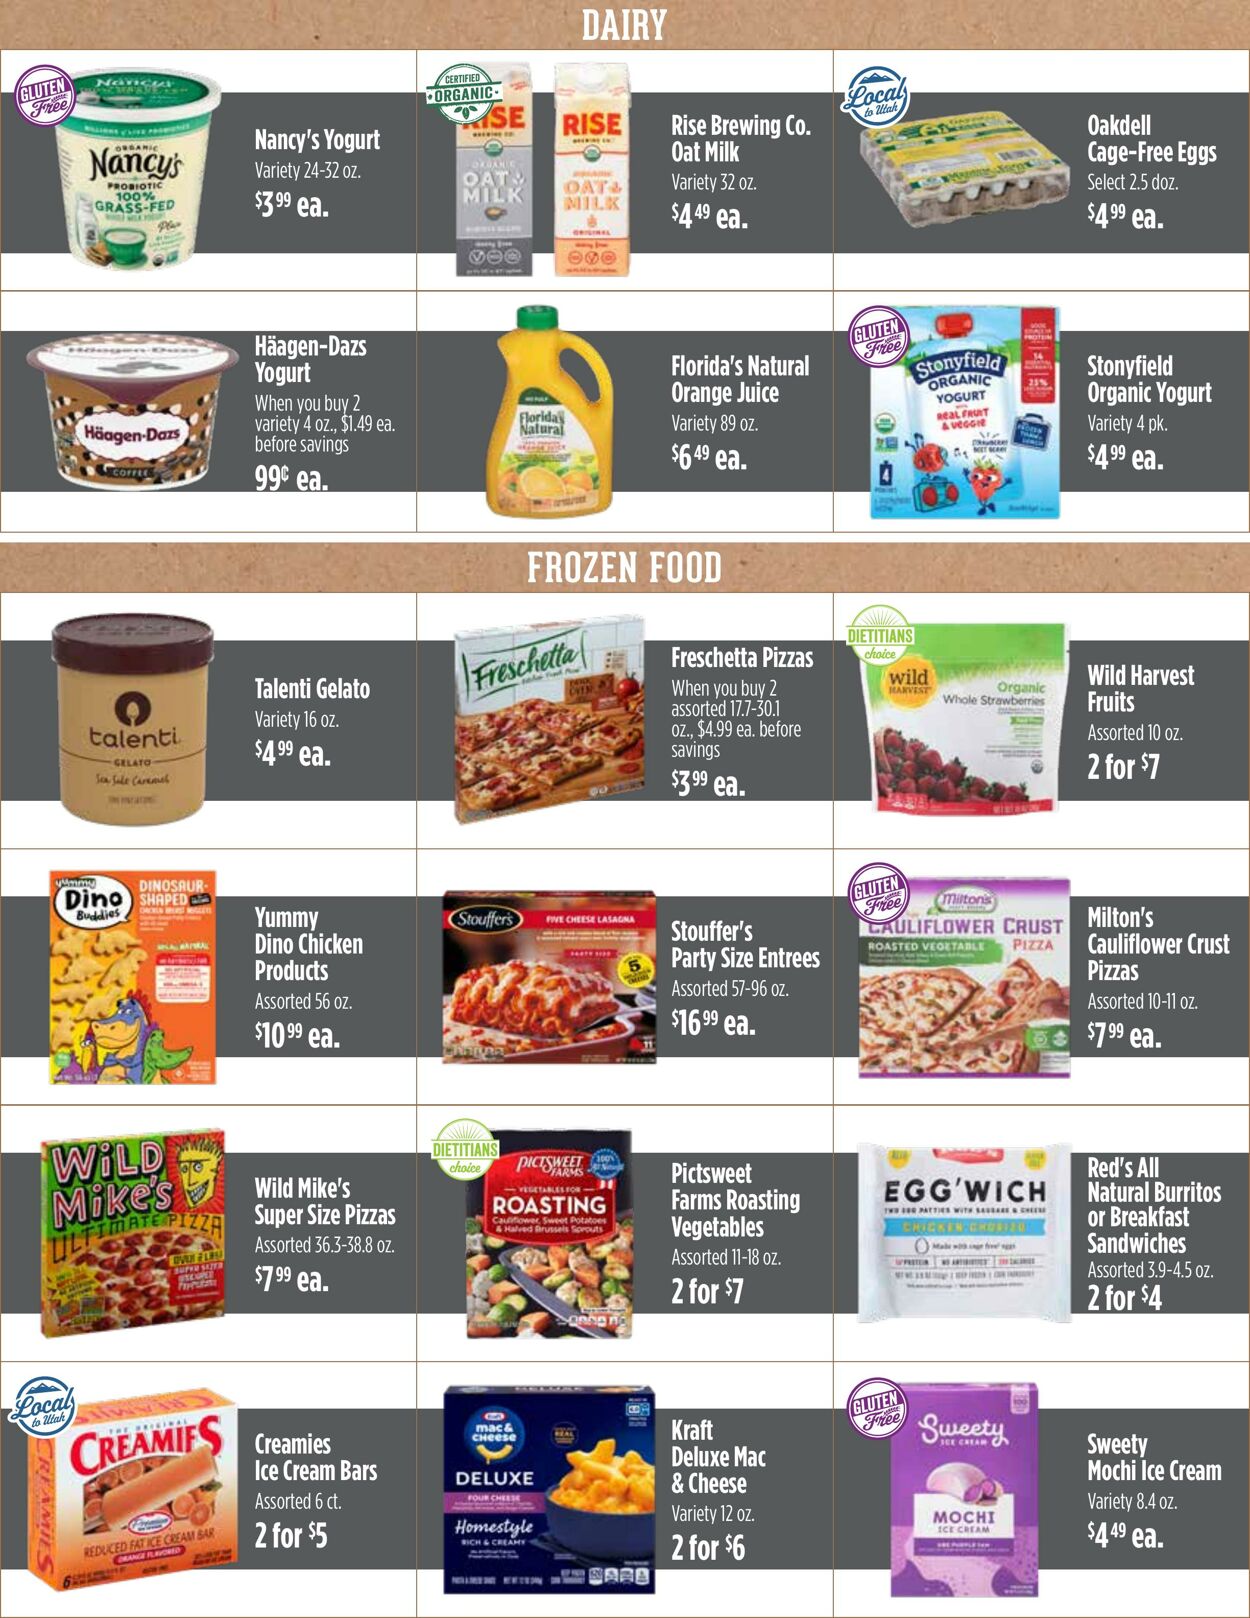 Weekly ad Harmons Grocery 03/19/2024 - 03/25/2024